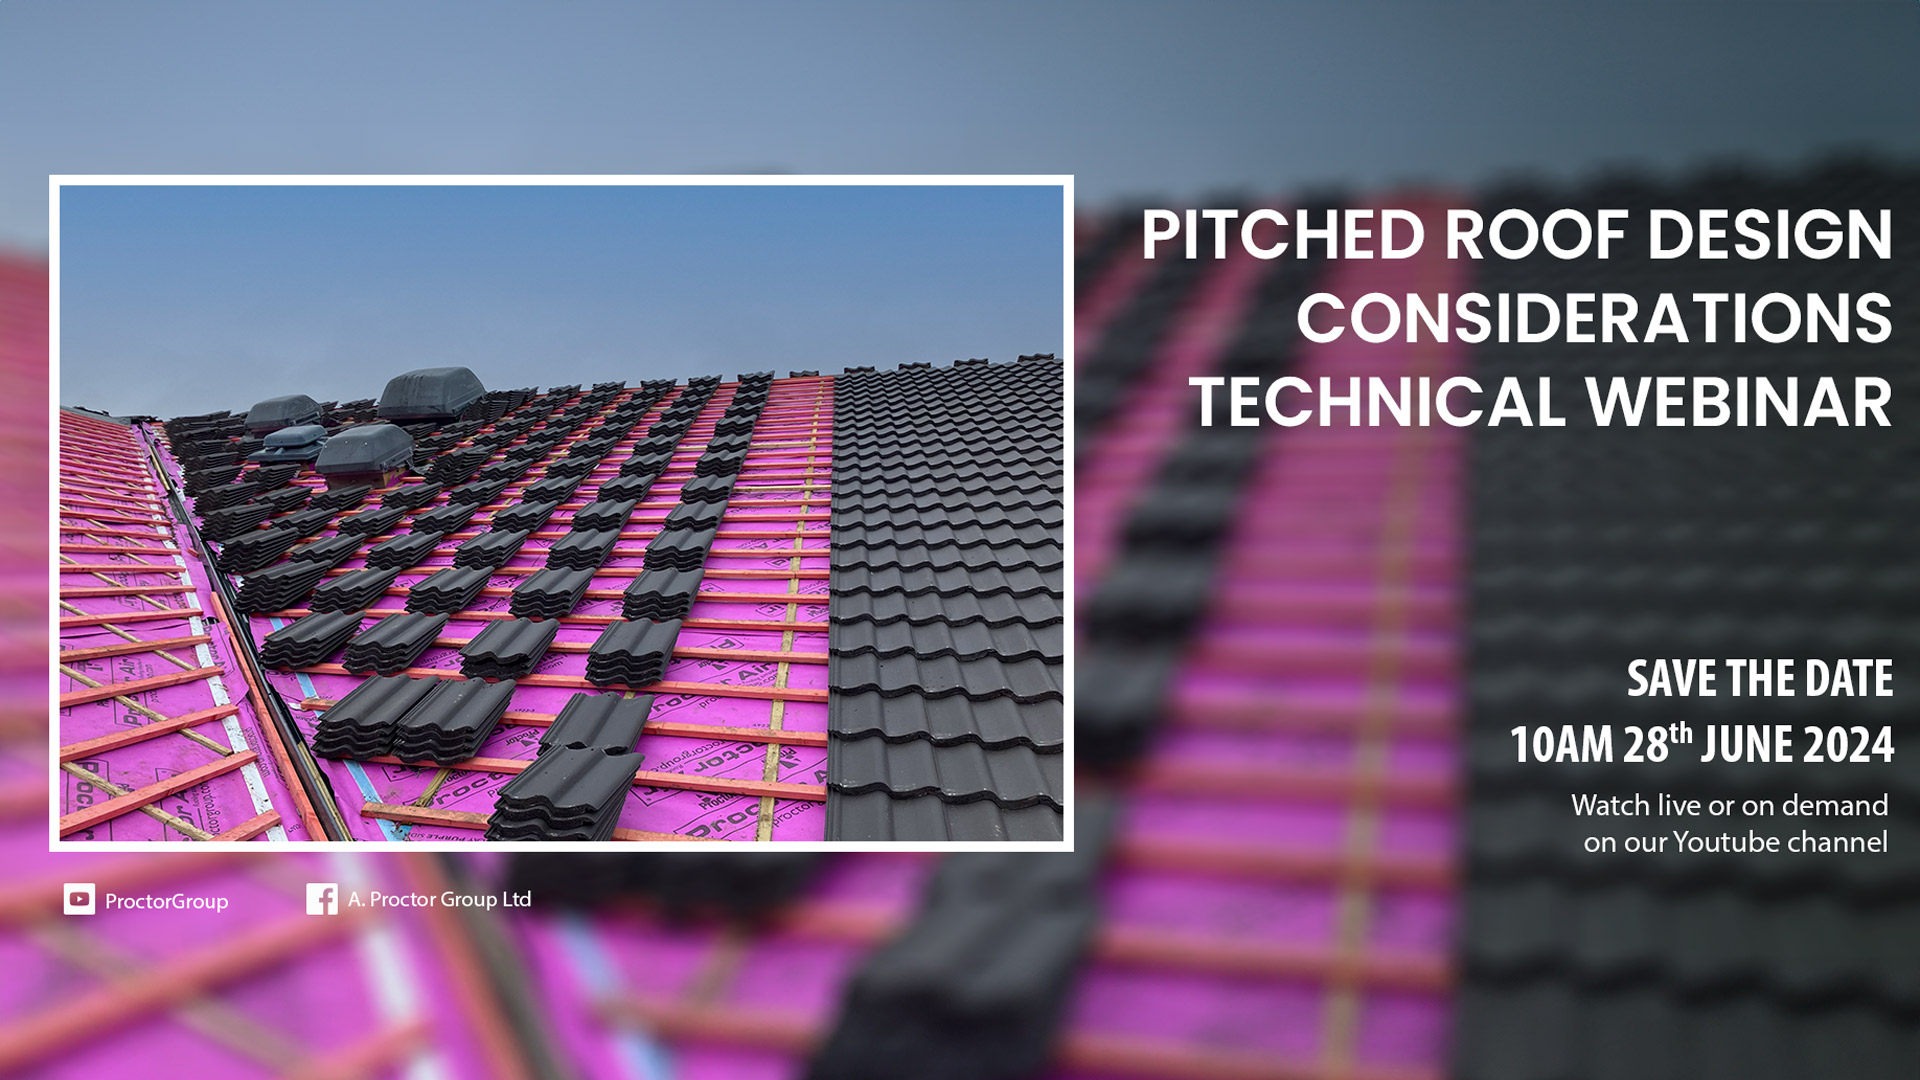 This RIBA assessed 40-minute webinar gives an overview of pitched roof design considerations and regulations in the UK and Ireland, along with discussing the type of construction membranes used as pitched roof underlays and the effect their performance has on design.